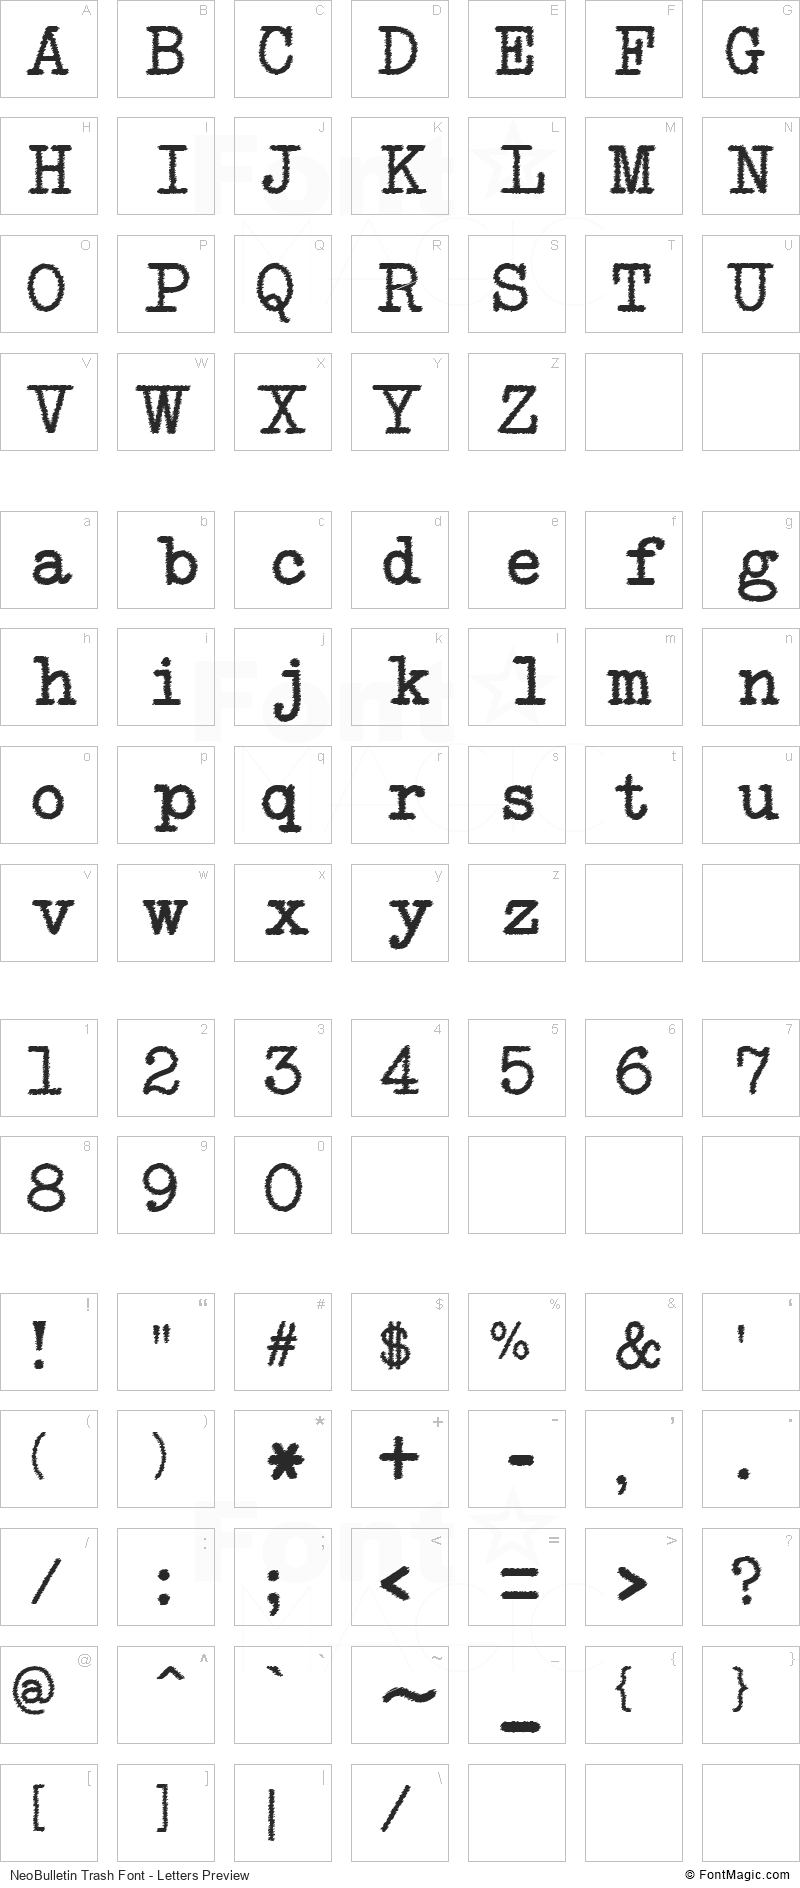 NeoBulletin Trash Font - All Latters Preview Chart